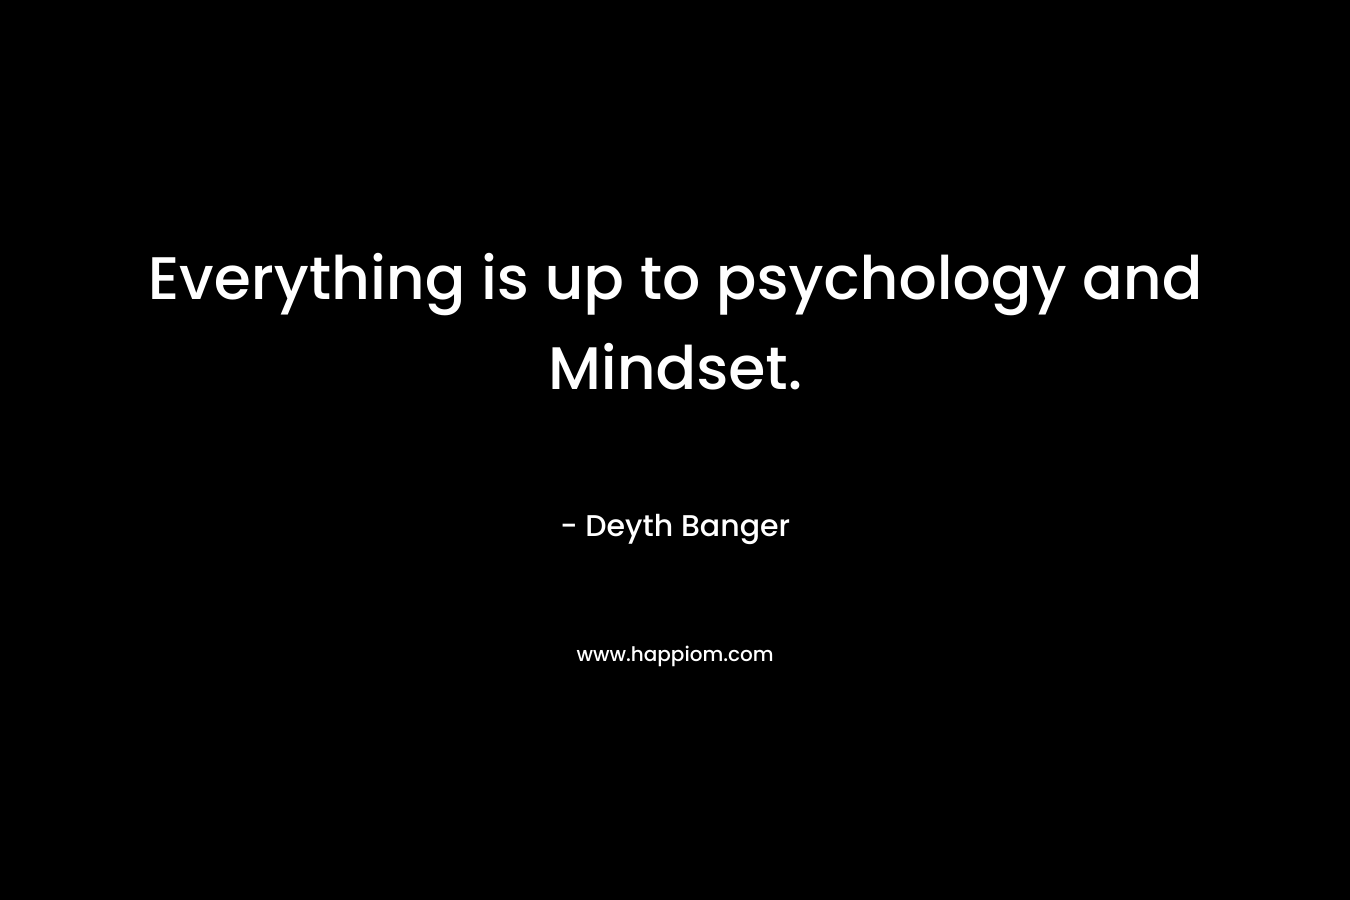 Everything is up to psychology and Mindset.